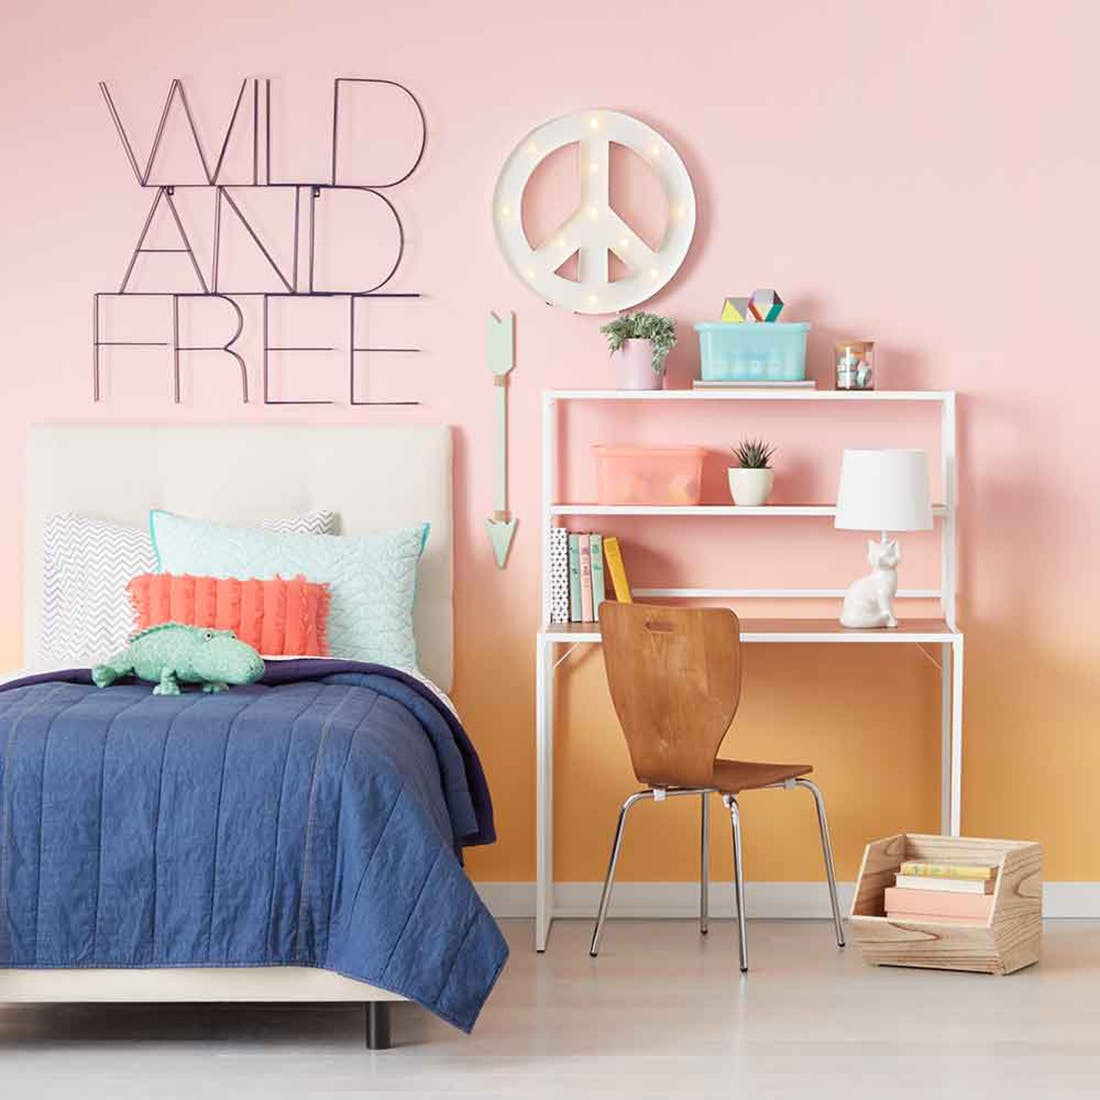 Target Kids Room Decor
 Tar ’s New Gender Neutral Kids’ Decor Line Might Be the